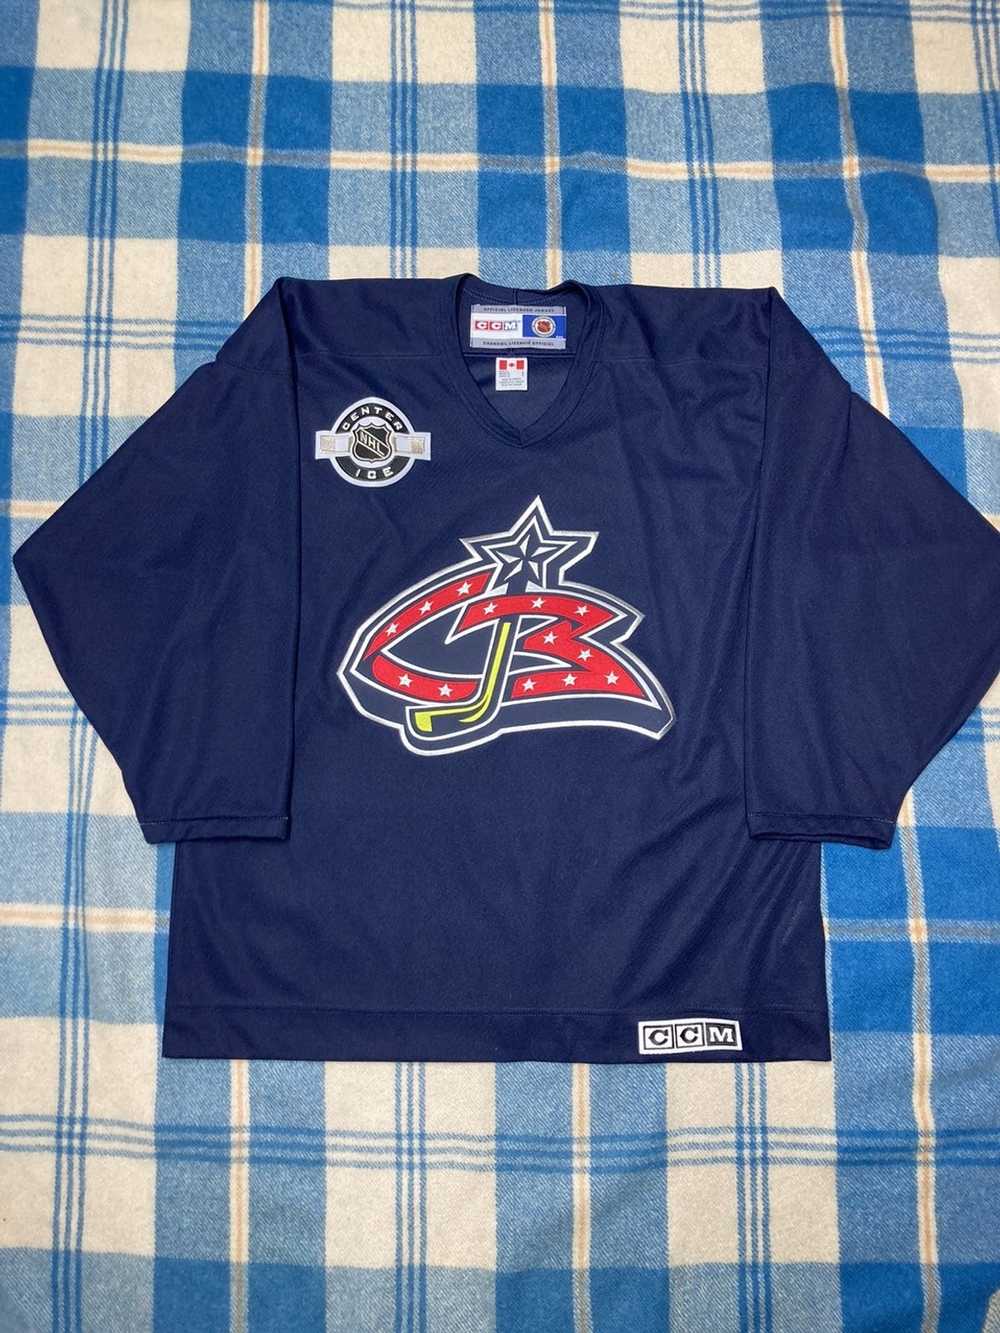 VINTAGE CCM NHL EMBROIDERED BUFFALO SABRES YOUTH CHILD HOCKEY JERSEY L, XL  BOYS